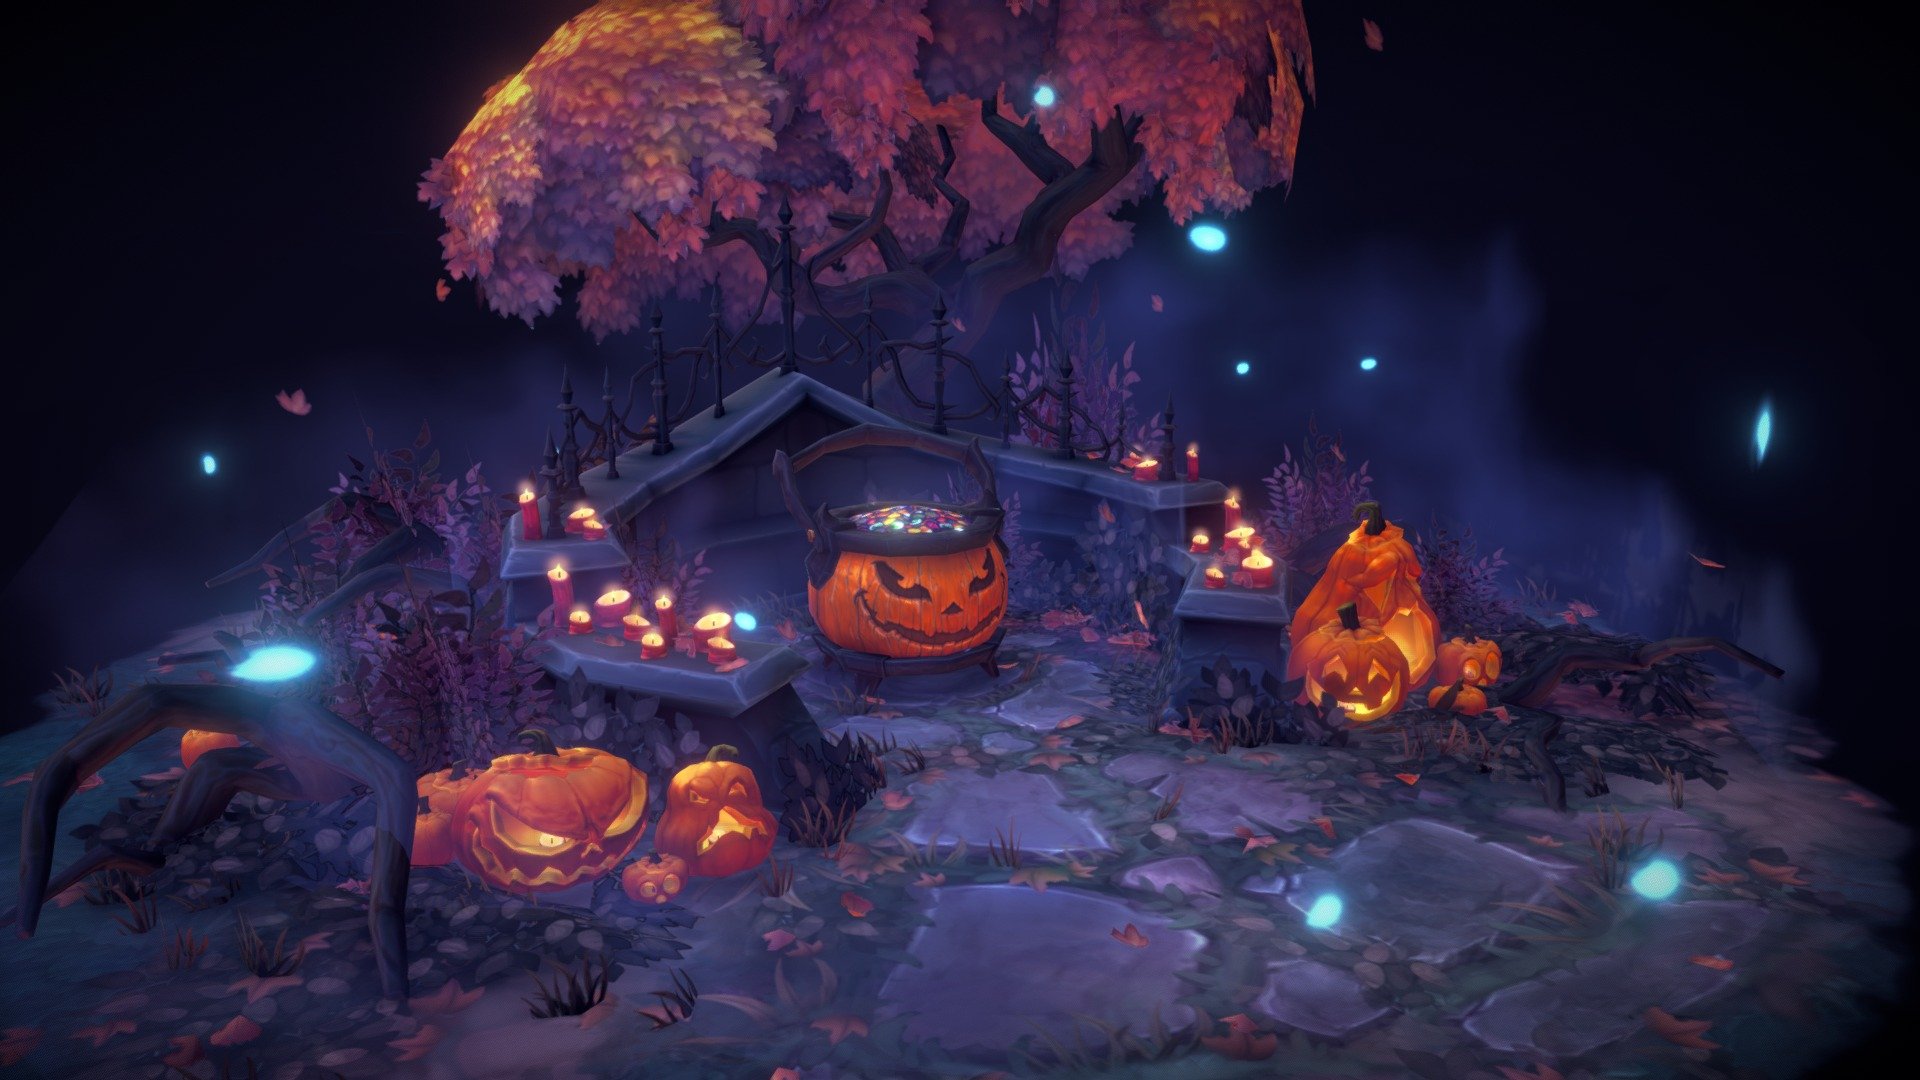 Happy Halloween! I've always loved the Warcraft hand painted art style, and I was Inspired by the in-game Hallow's End event in World of Warcraft. My goal was to create a 3D scene that a player could stumble upon in Azeroth, to trick or treat at. This was a lot of fun to work on and will probably make some more WoW inspired scenes in the future 3d model